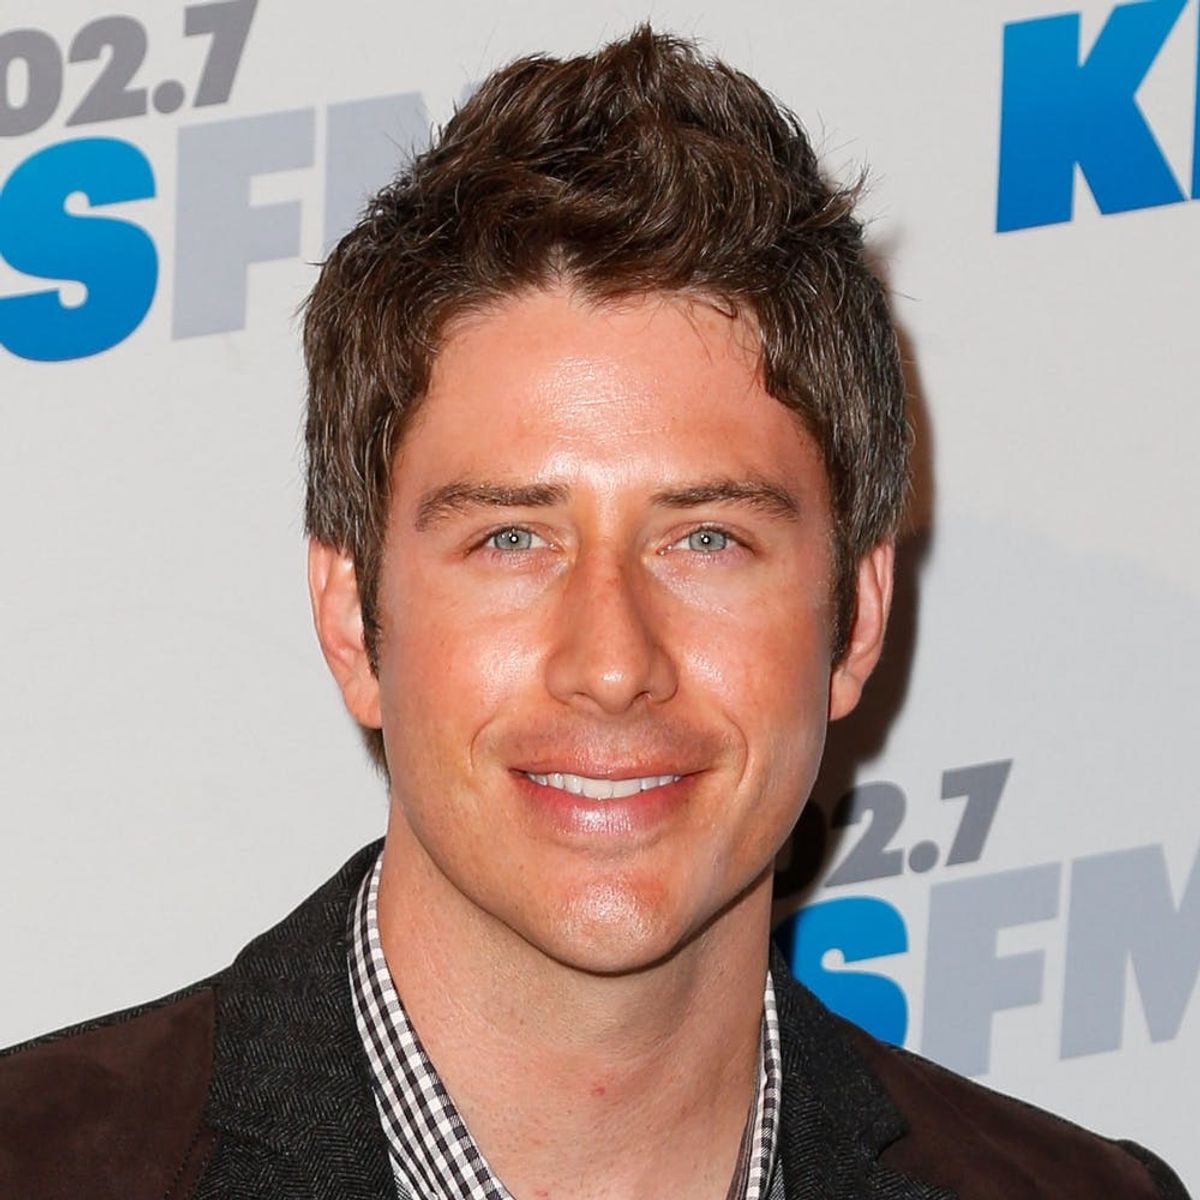 Here’s When “The Bachelor” Season 22 With Arie Luyendyk Jr. Premieres